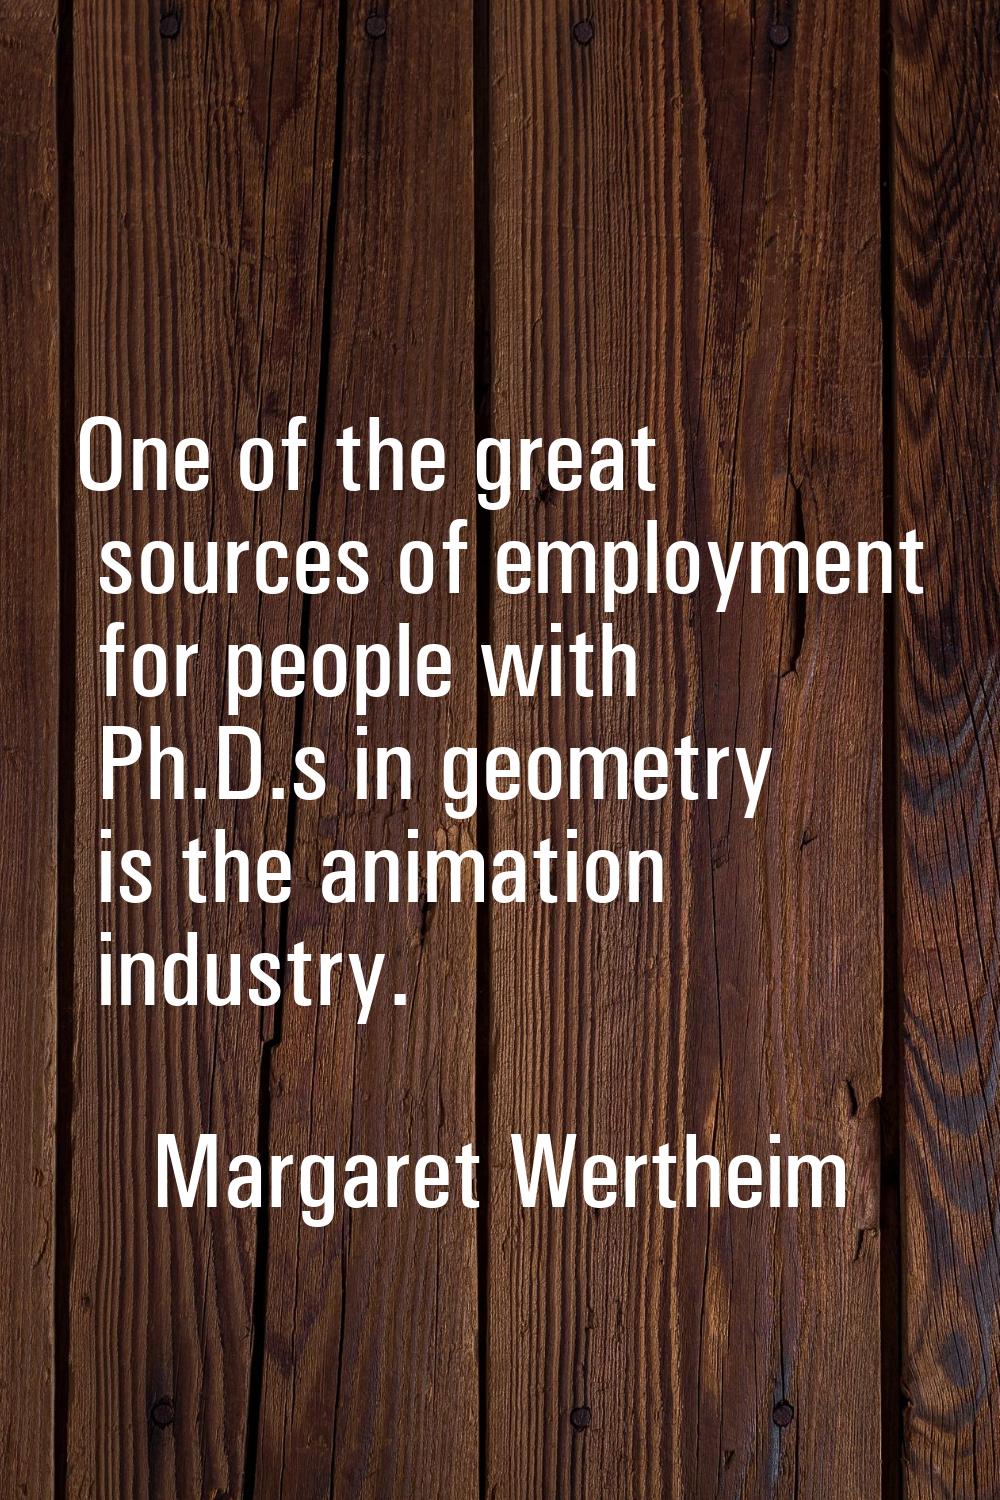 One of the great sources of employment for people with Ph.D.s in geometry is the animation industry